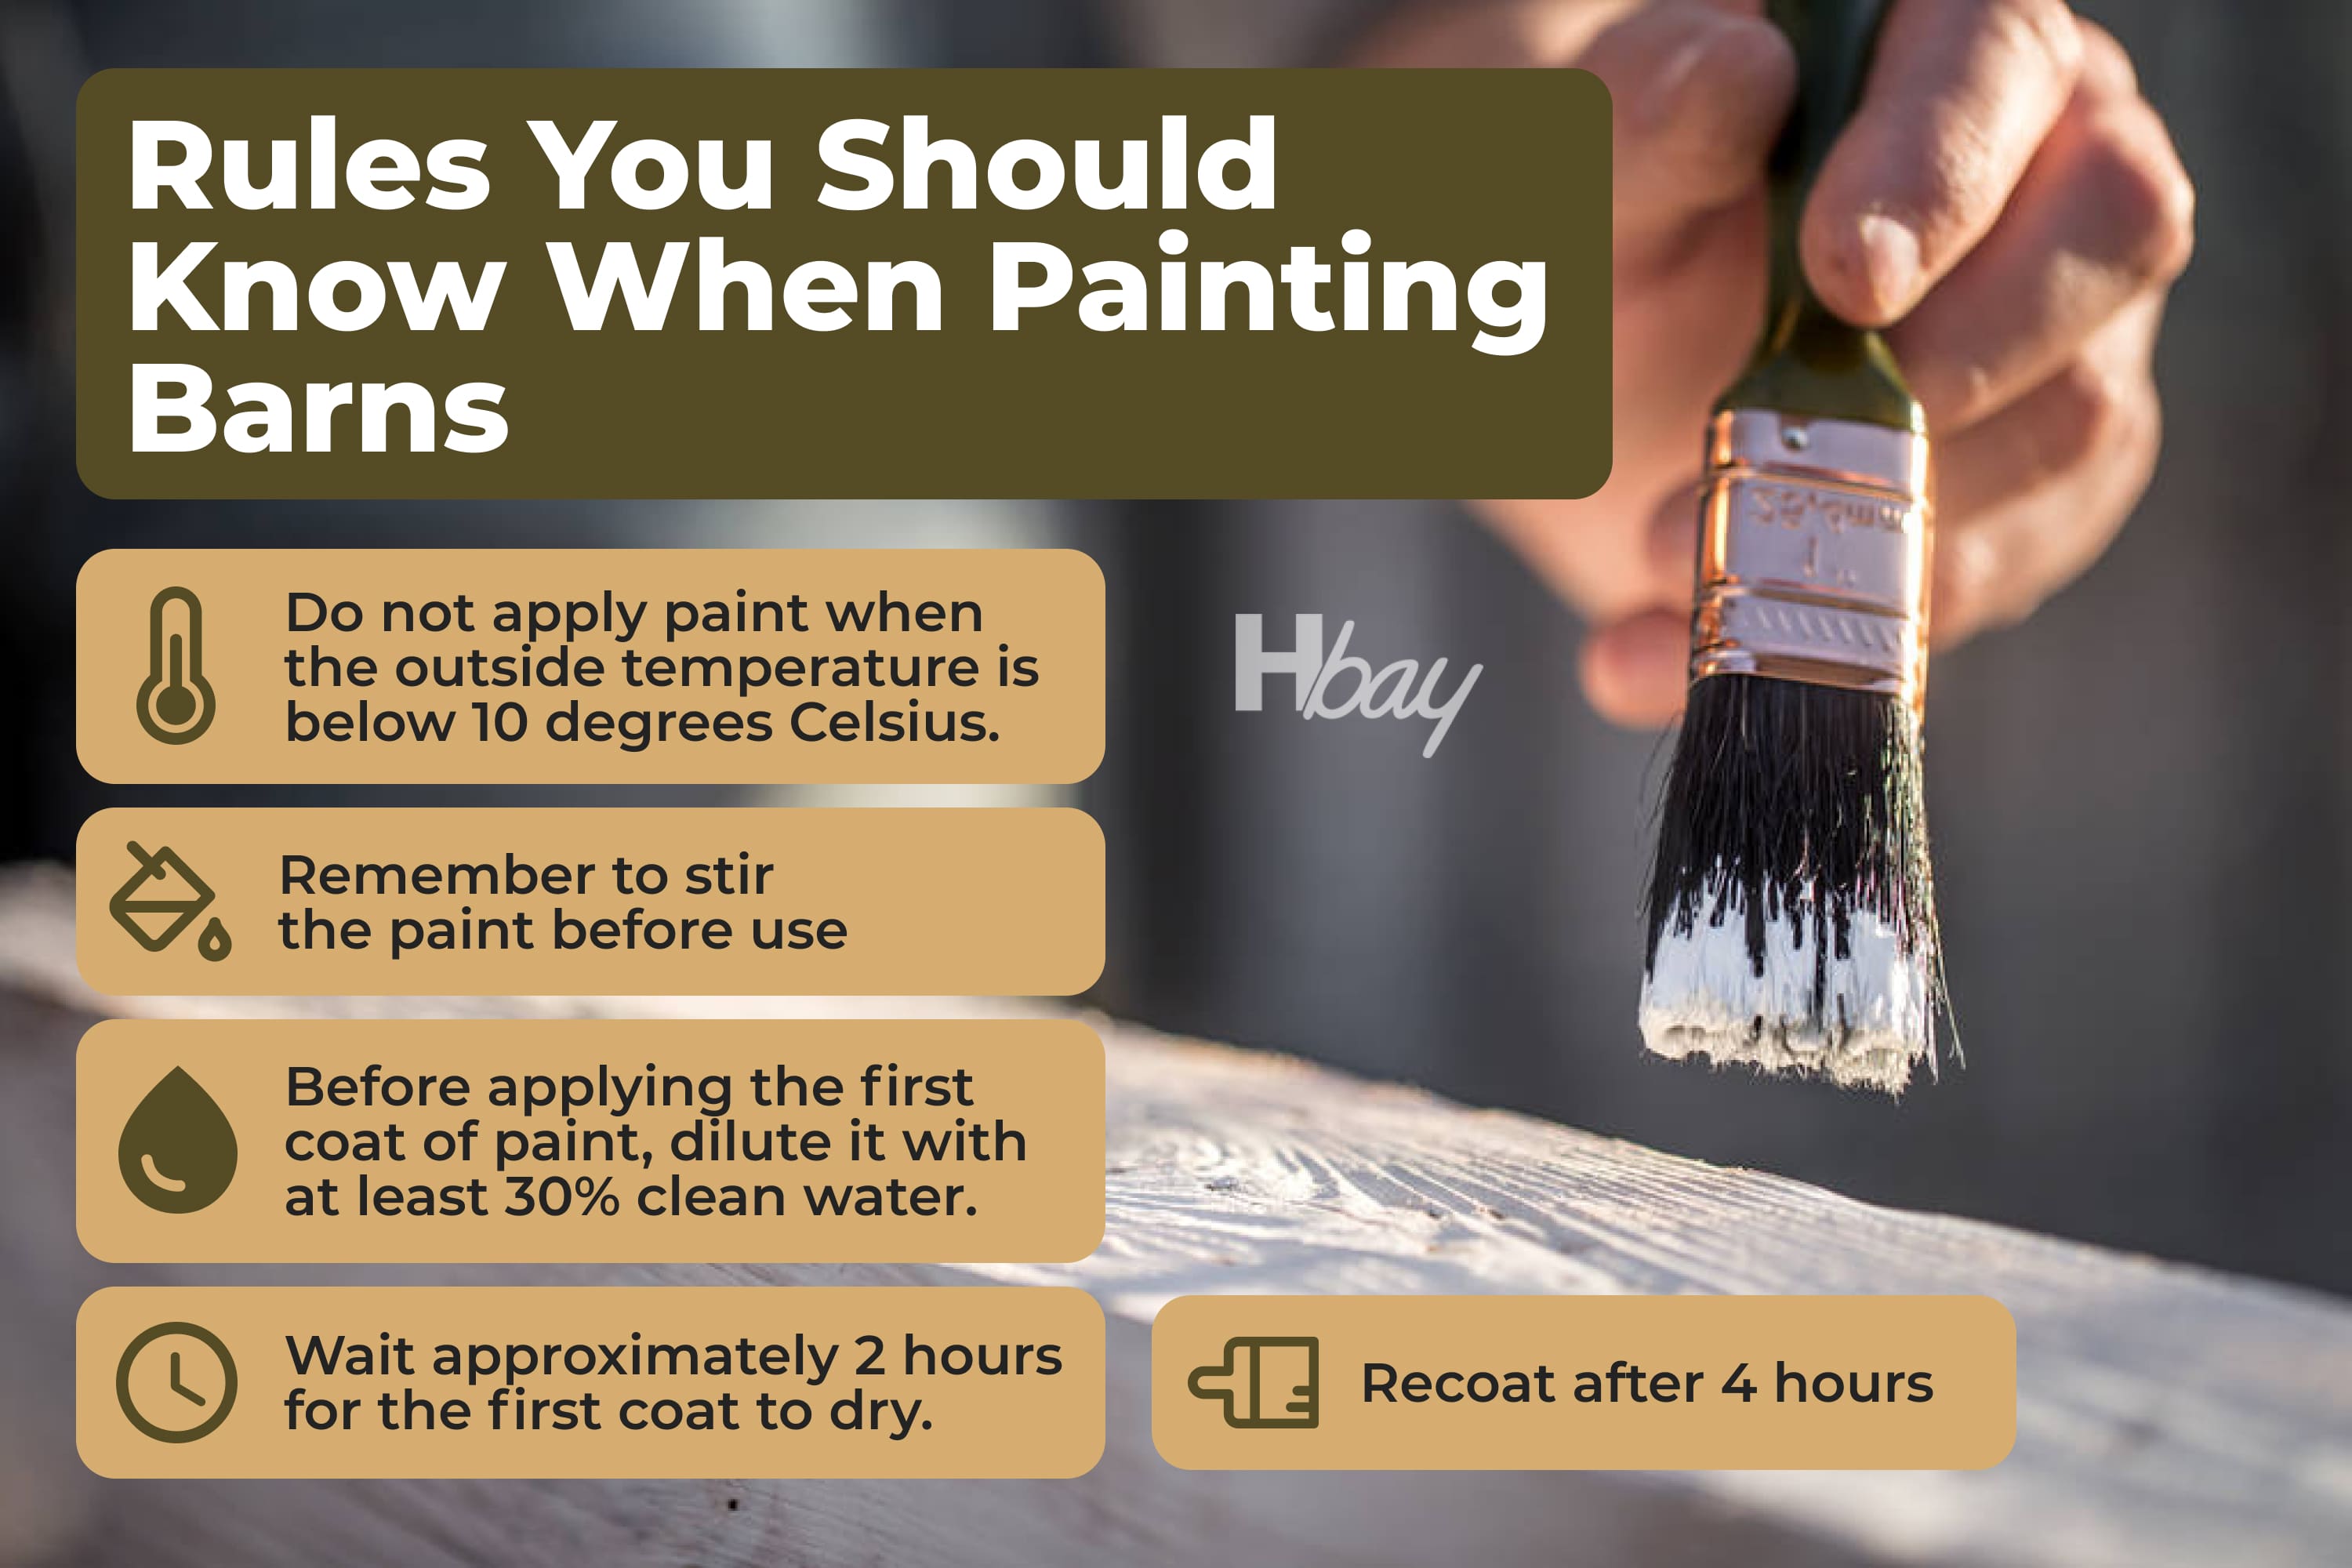 Rules you should know when painting barns